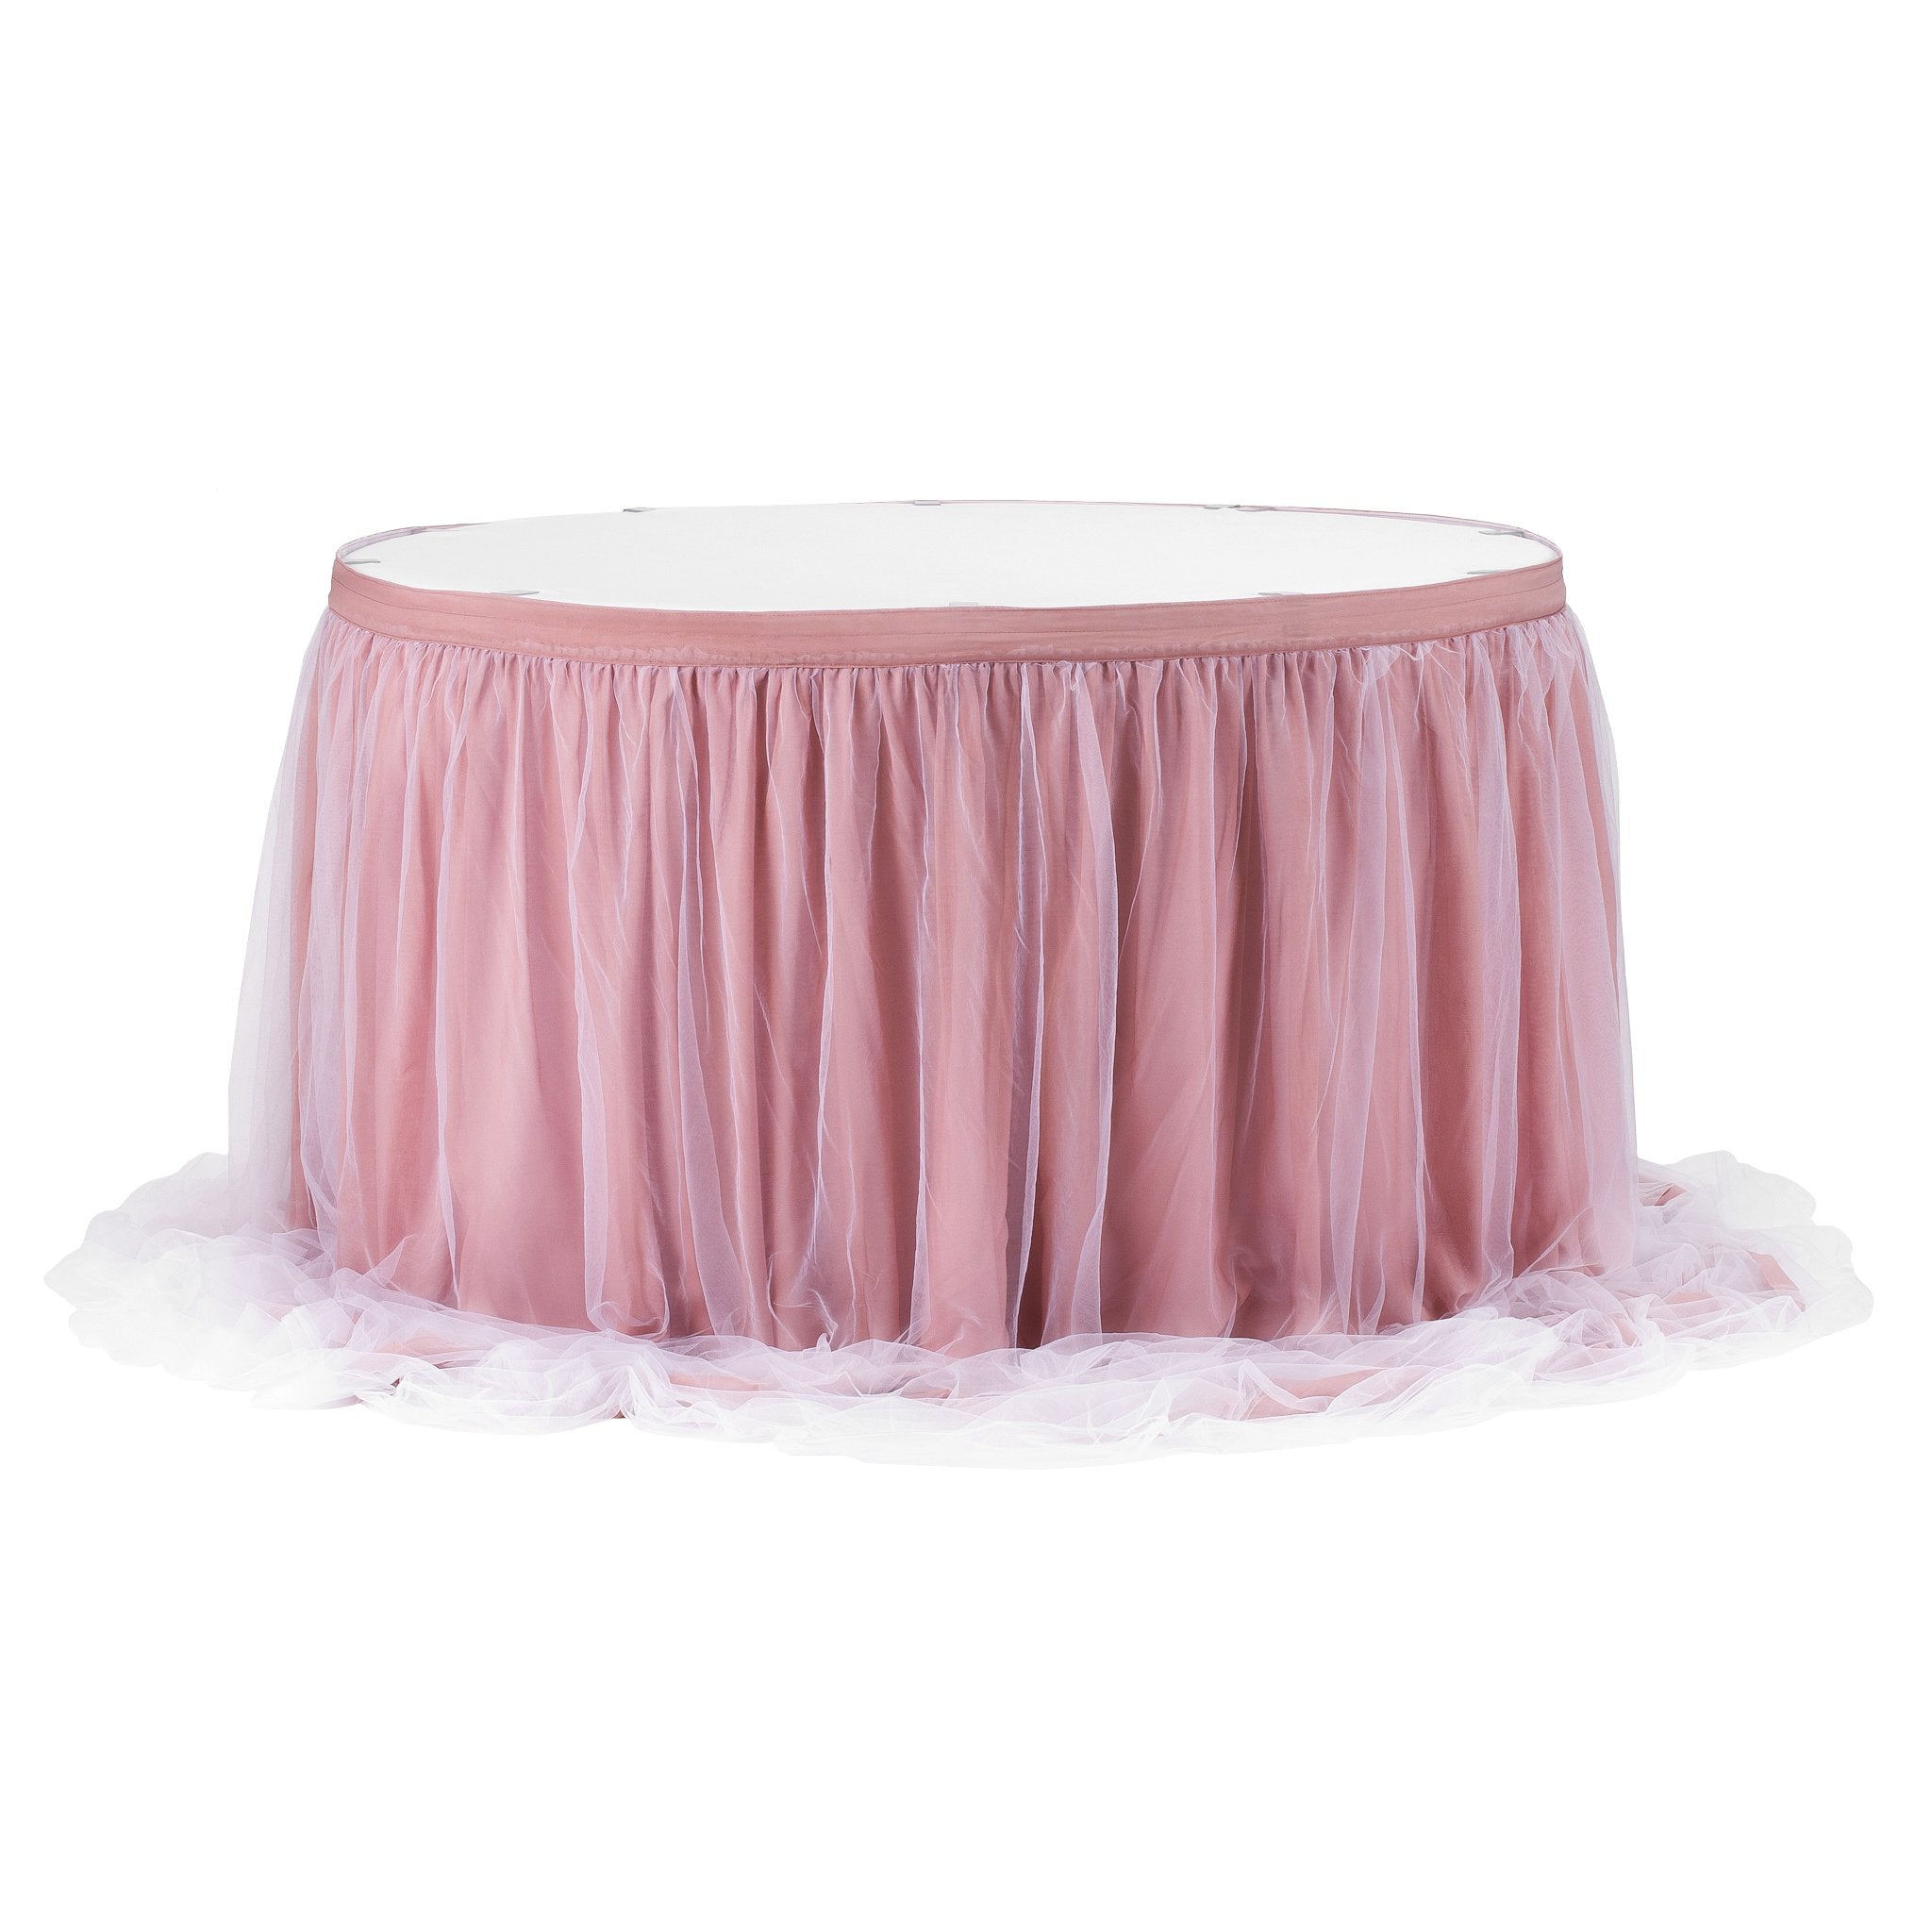 Chiffon Tulle Extra Long Table Skirts - Extra Long Pooling Table Skirt ...